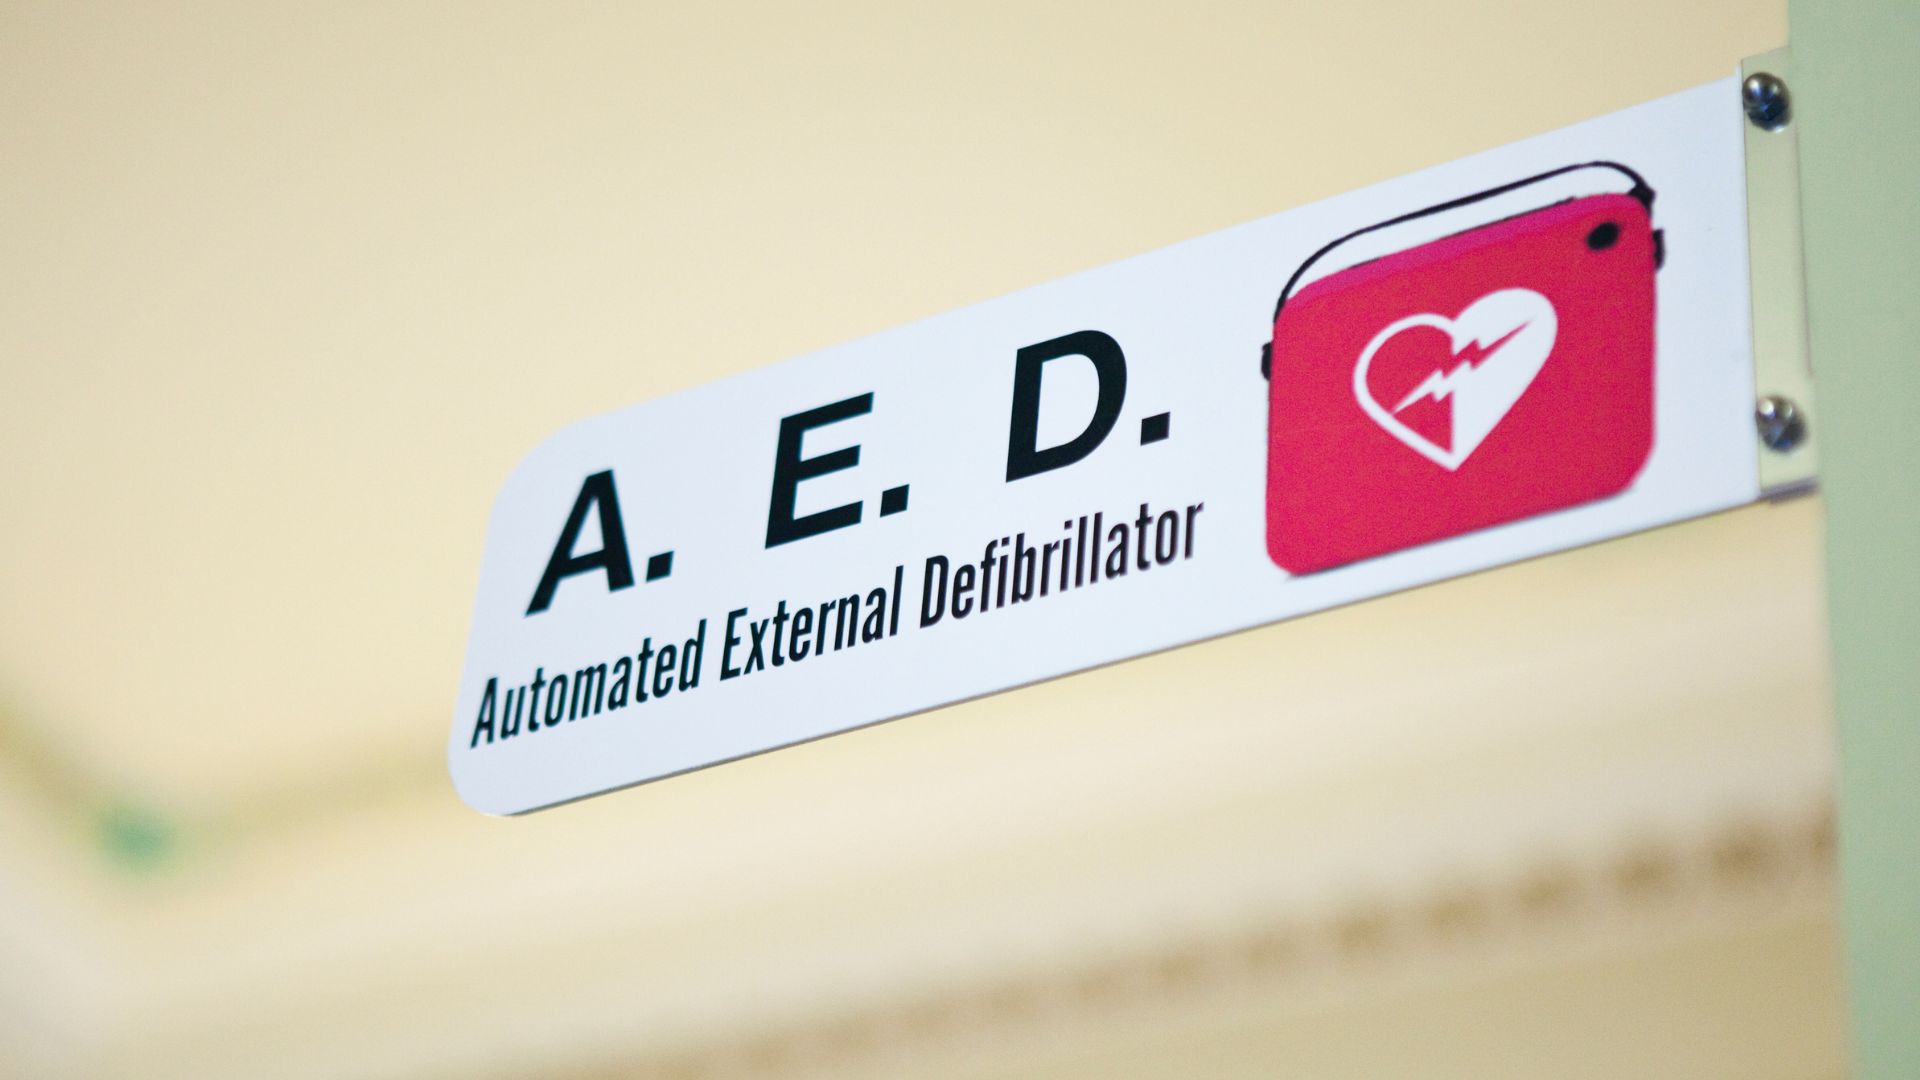 What Is a Defibrillator and How Does It Work?